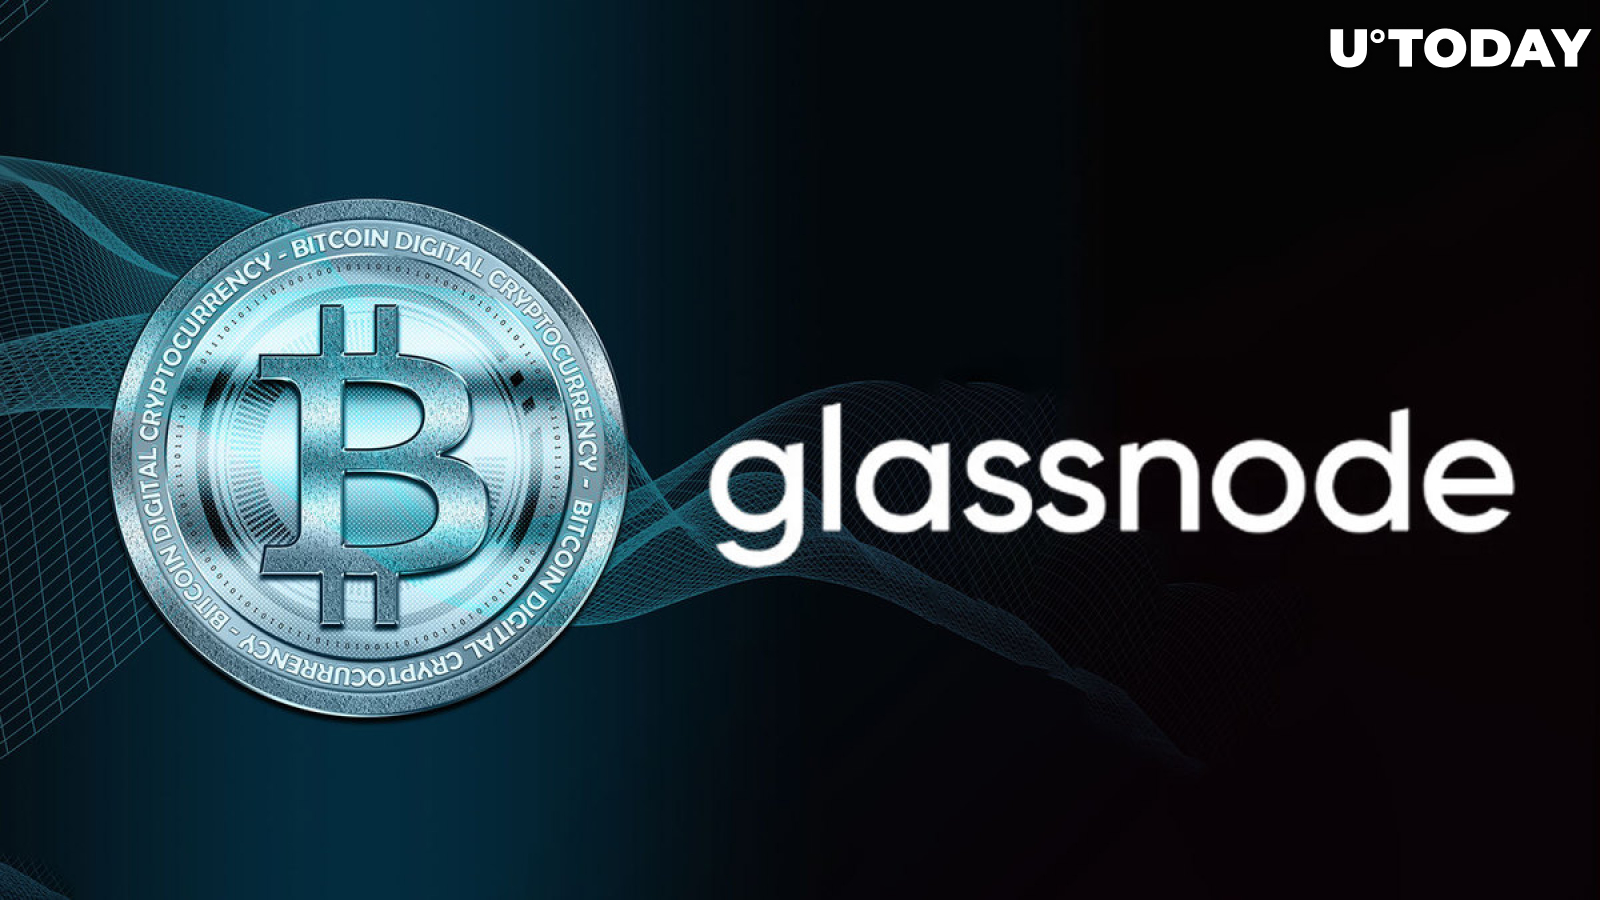 Glassnode Co-Founder: $30,000 Next for Bitcoin (BTC), Bears Are Wrong